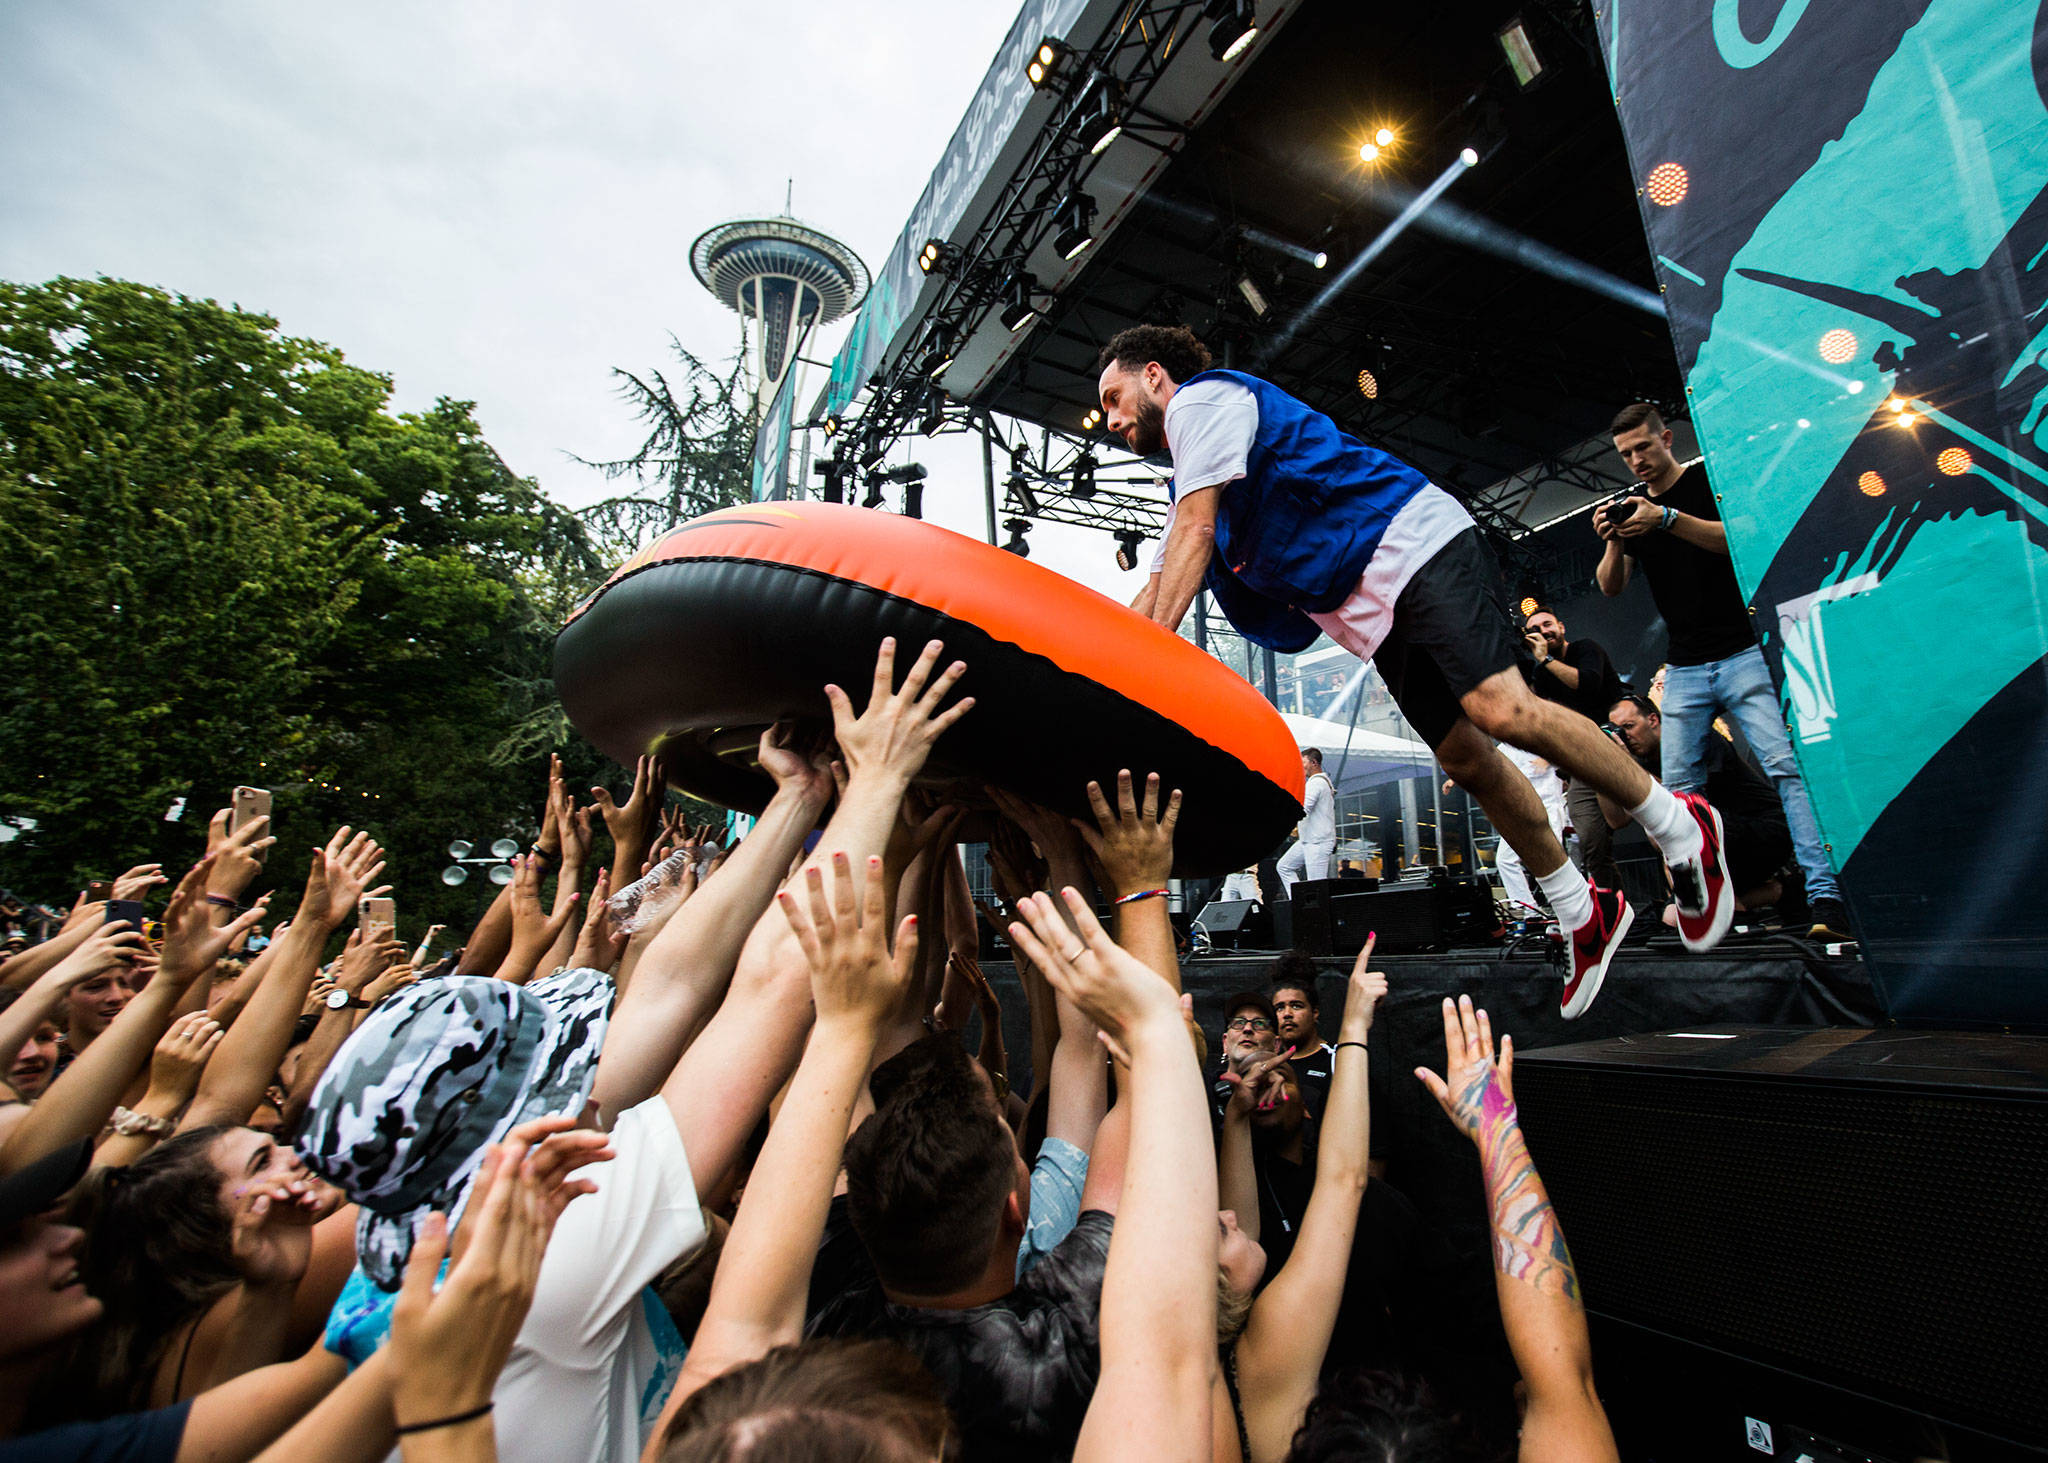 Sol jumps into an inflatable boat onto the crowd during his performance at Bumbershoot Music & Arts Festival on Friday, Aug. 30, 2019 in Seattle, Wash. (Olivia Vanni / The Herald)